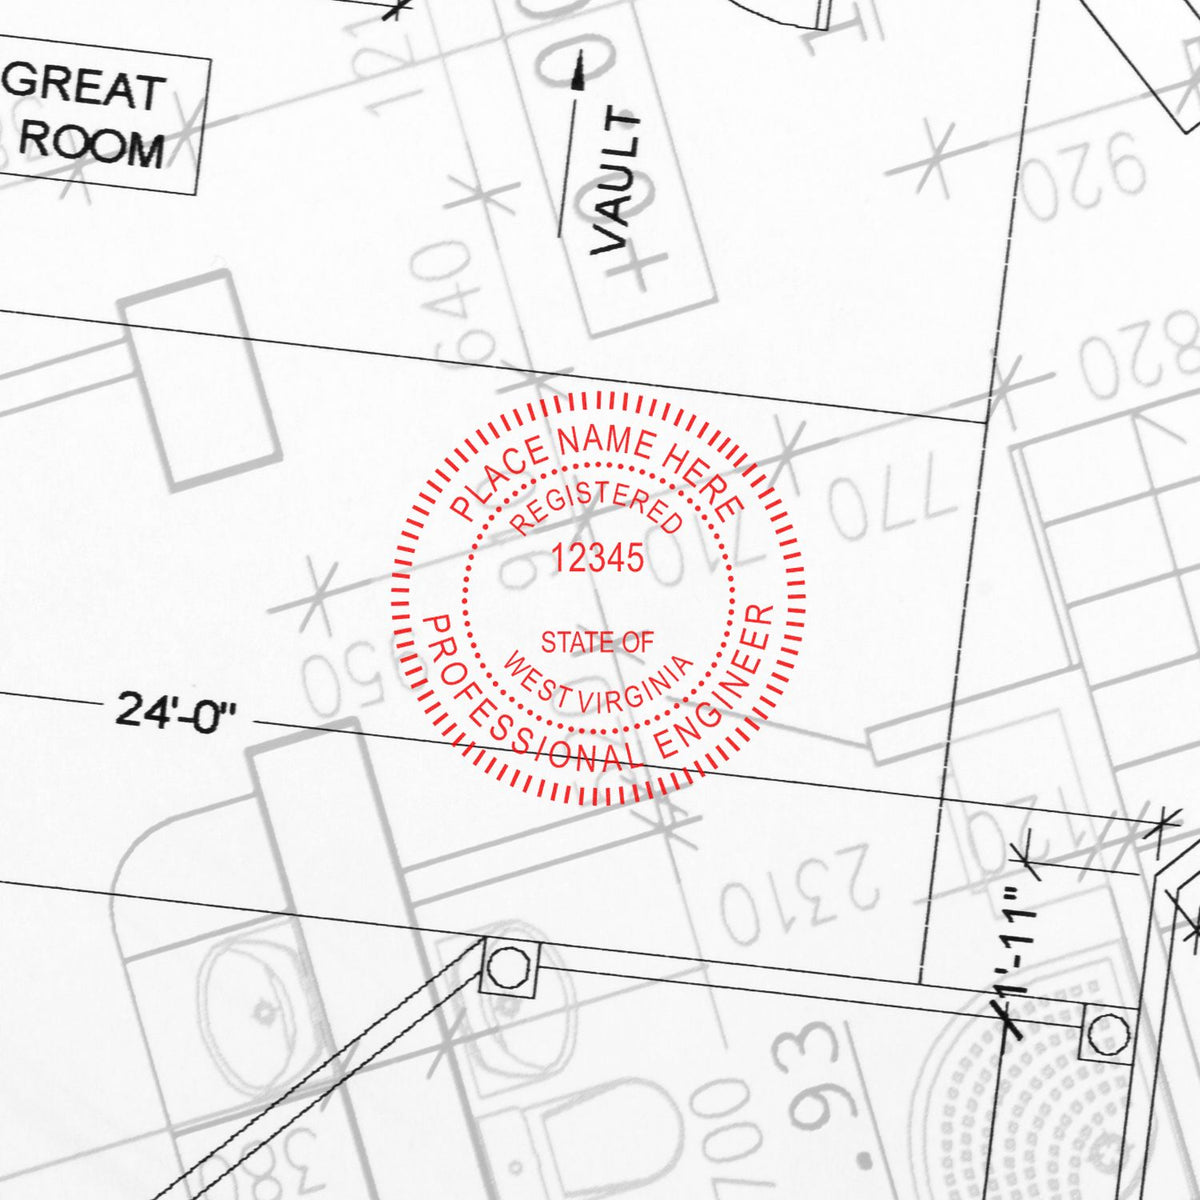 Another Example of a stamped impression of the Premium MaxLight Pre-Inked West Virginia Engineering Stamp on a piece of office paper.